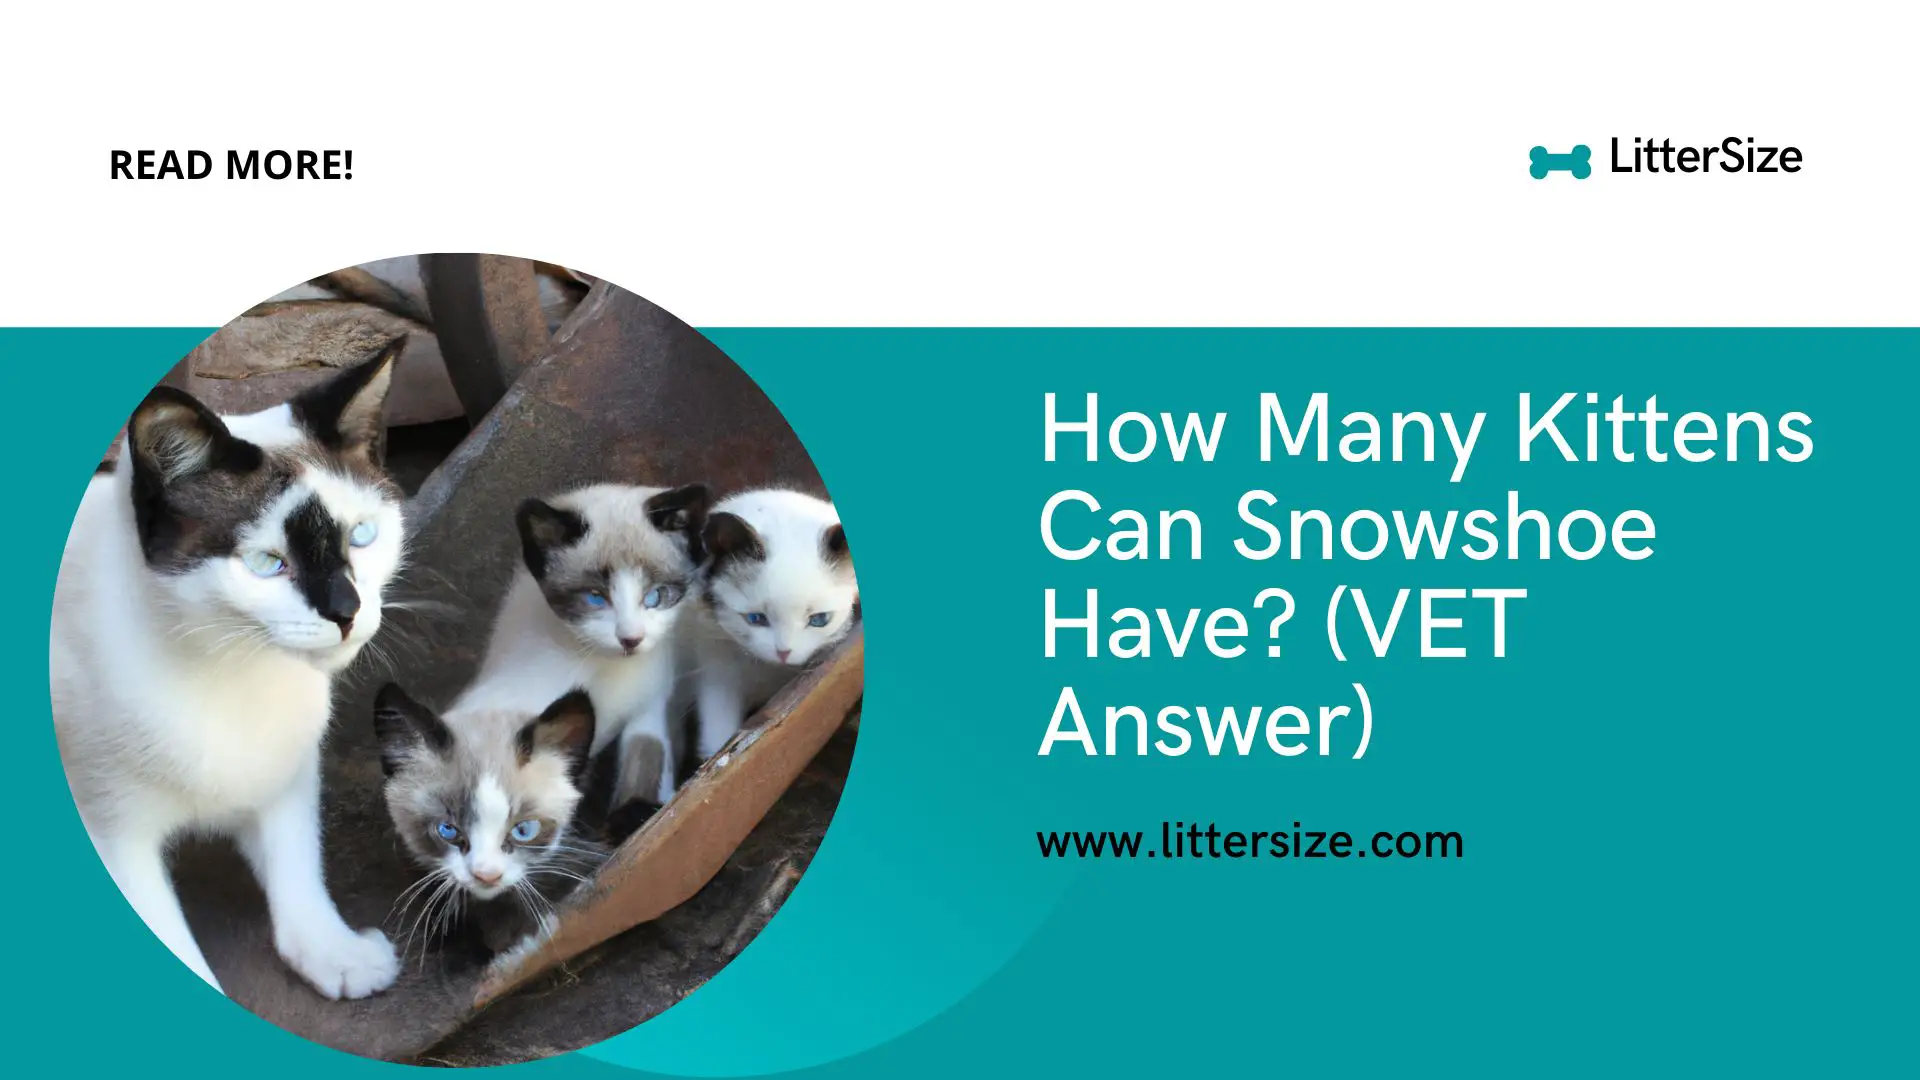 How Many Kittens Can Snowshoe Have? (VET Answer)